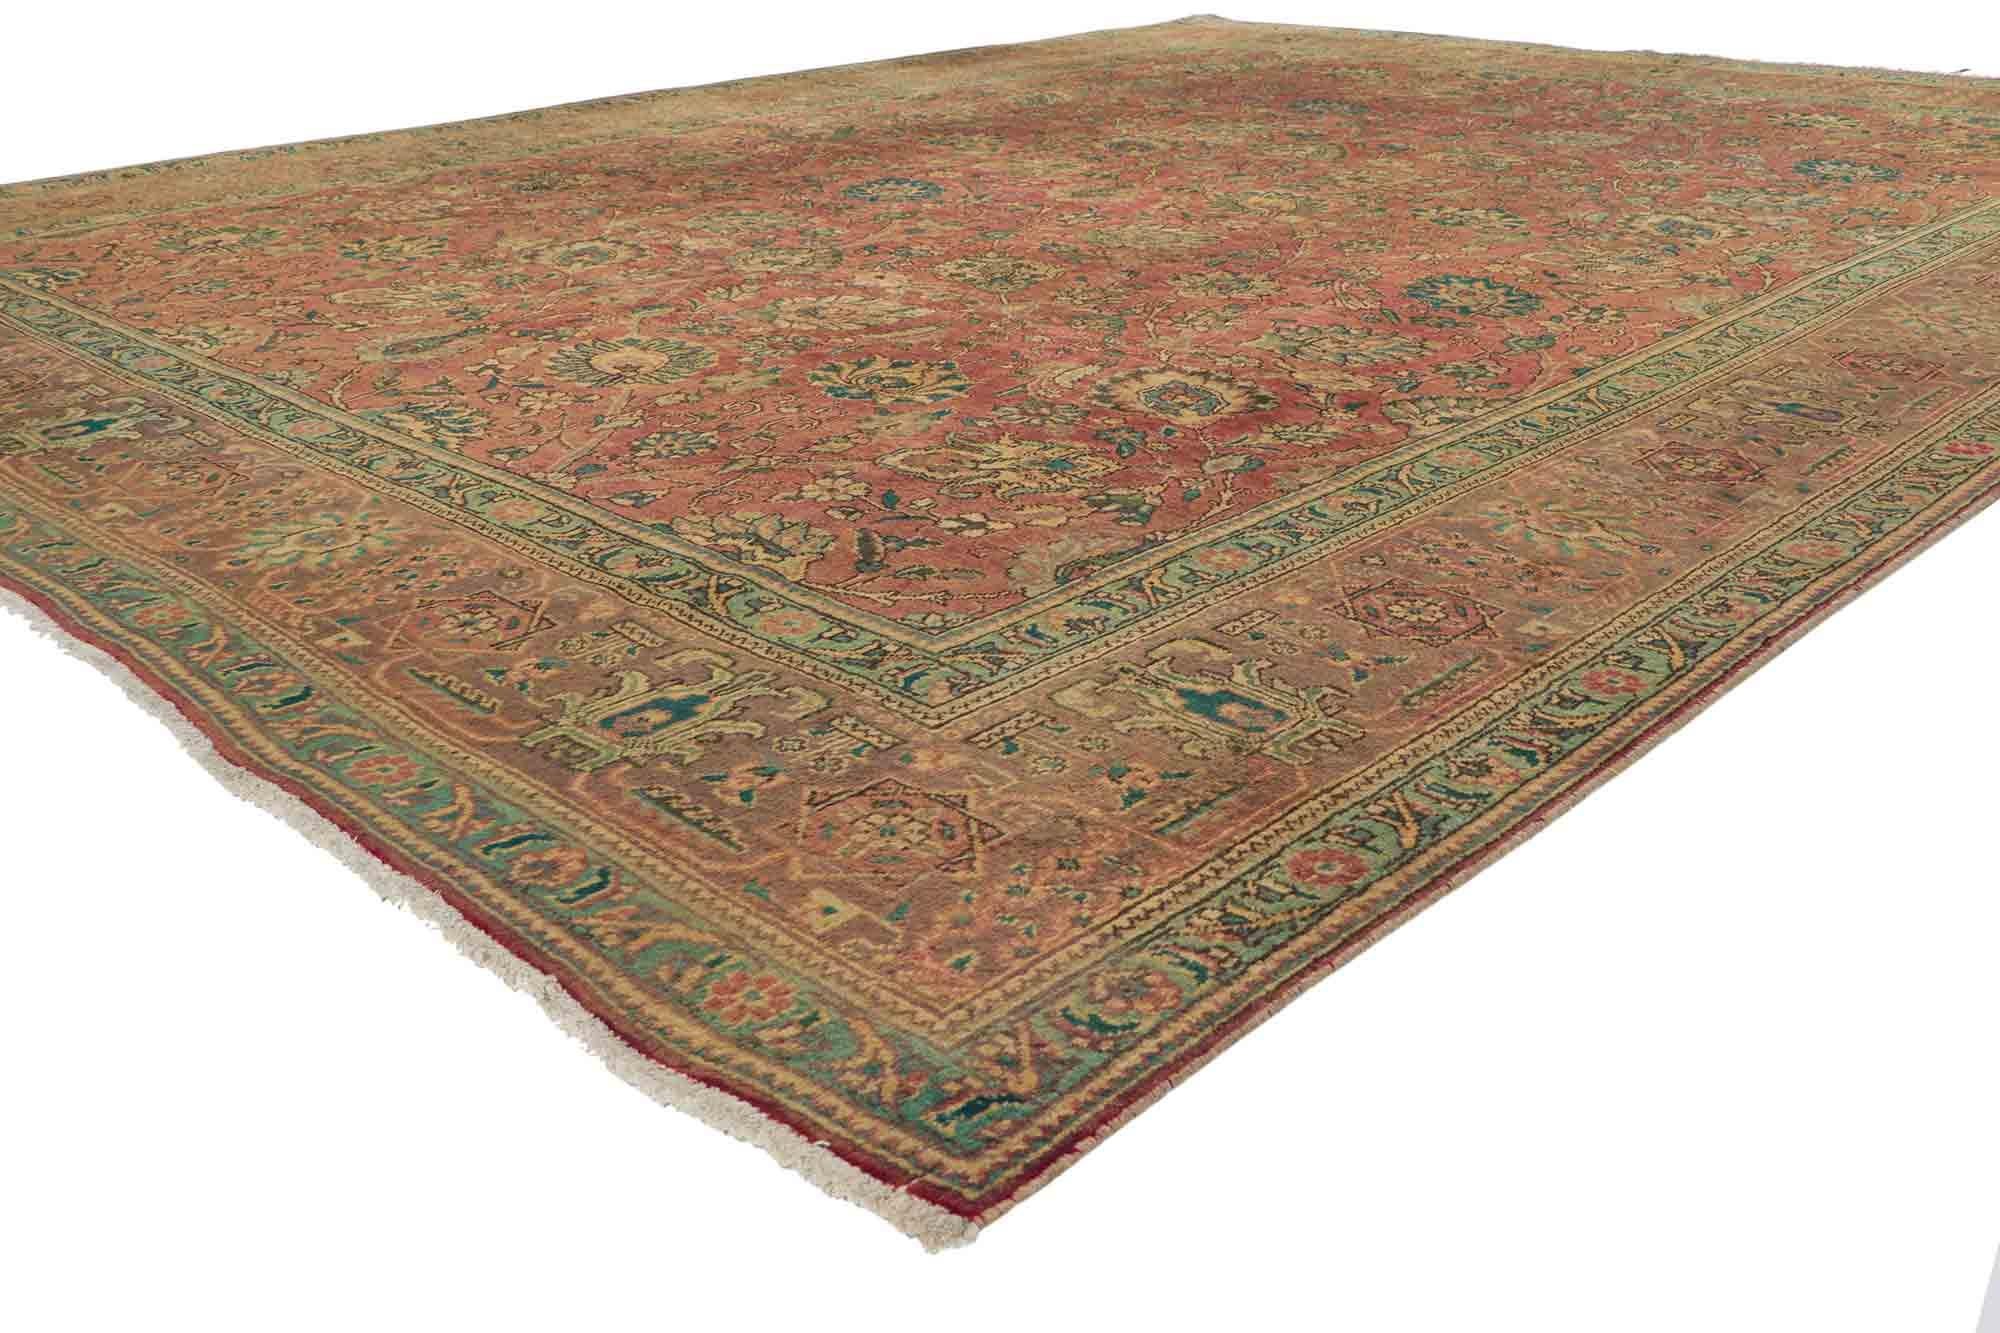 76271, vintage Persian Tabriz area rug with traditional style. This hand-knotted wool vintage Persian Tabriz rug features a an all-over botanical pattern composed of lotus, palmettes and floral vines surrounded by a Classic border creating a